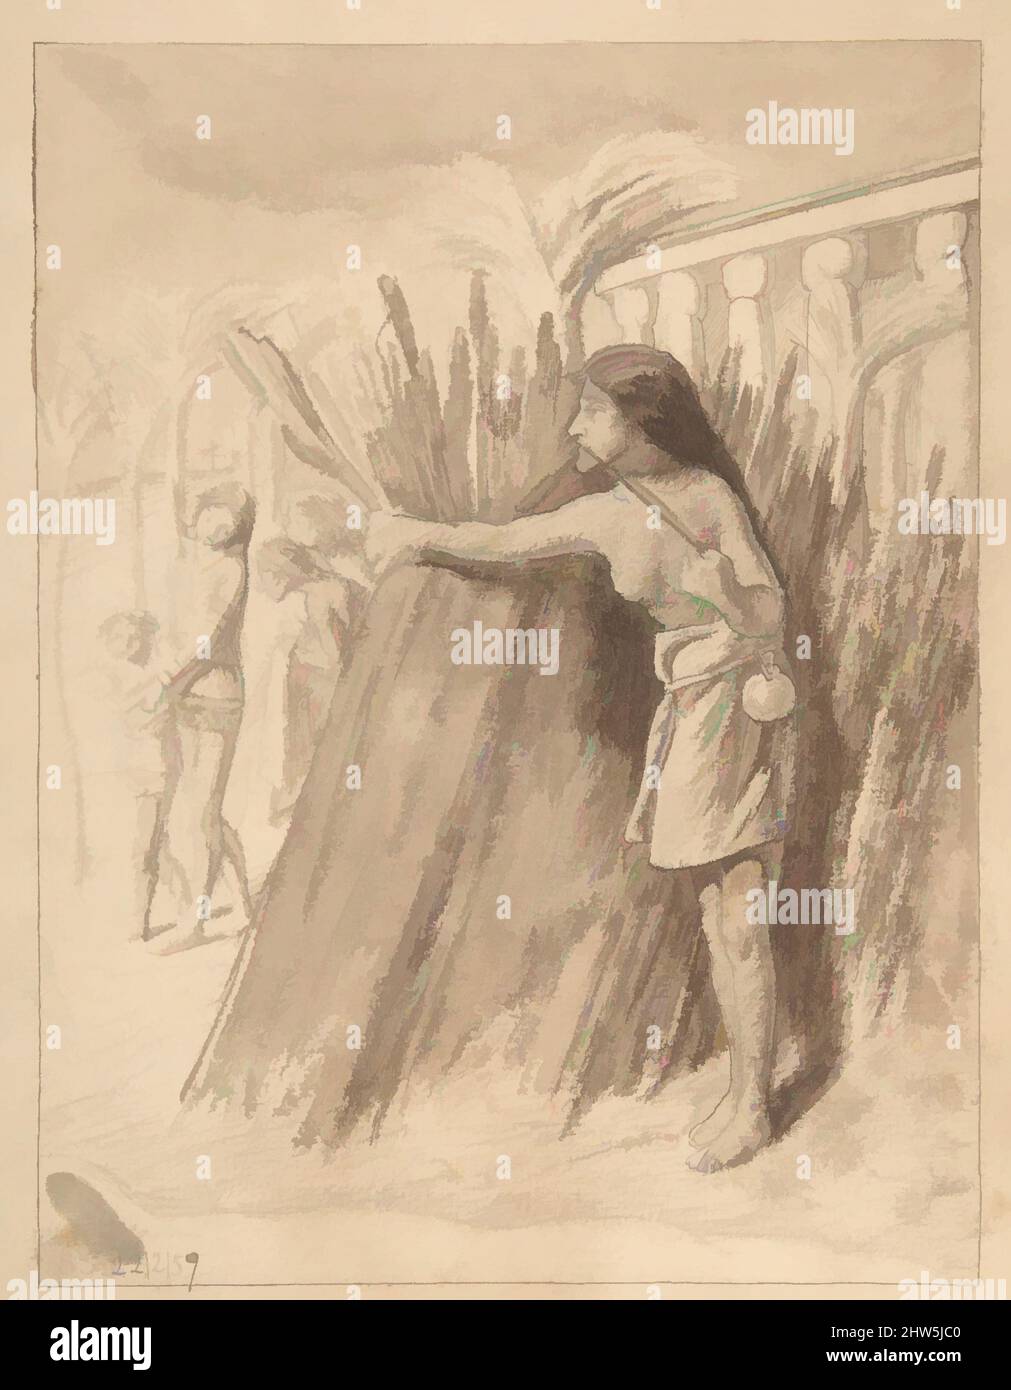 Art inspired by Miriam Watching the Finding of Moses in the Bulrushes, 1859, Pen and brown ink, brush and brown wash, over graphite, sheet: 10 x 8 7/16 in. (25.4 x 21.5 cm), Drawings, Simeon Solomon (British, London 1840–1905 London), As the youngest child in a Jewish family of three, Classic works modernized by Artotop with a splash of modernity. Shapes, color and value, eye-catching visual impact on art. Emotions through freedom of artworks in a contemporary way. A timeless message pursuing a wildly creative new direction. Artists turning to the digital medium and creating the Artotop NFT Stock Photo